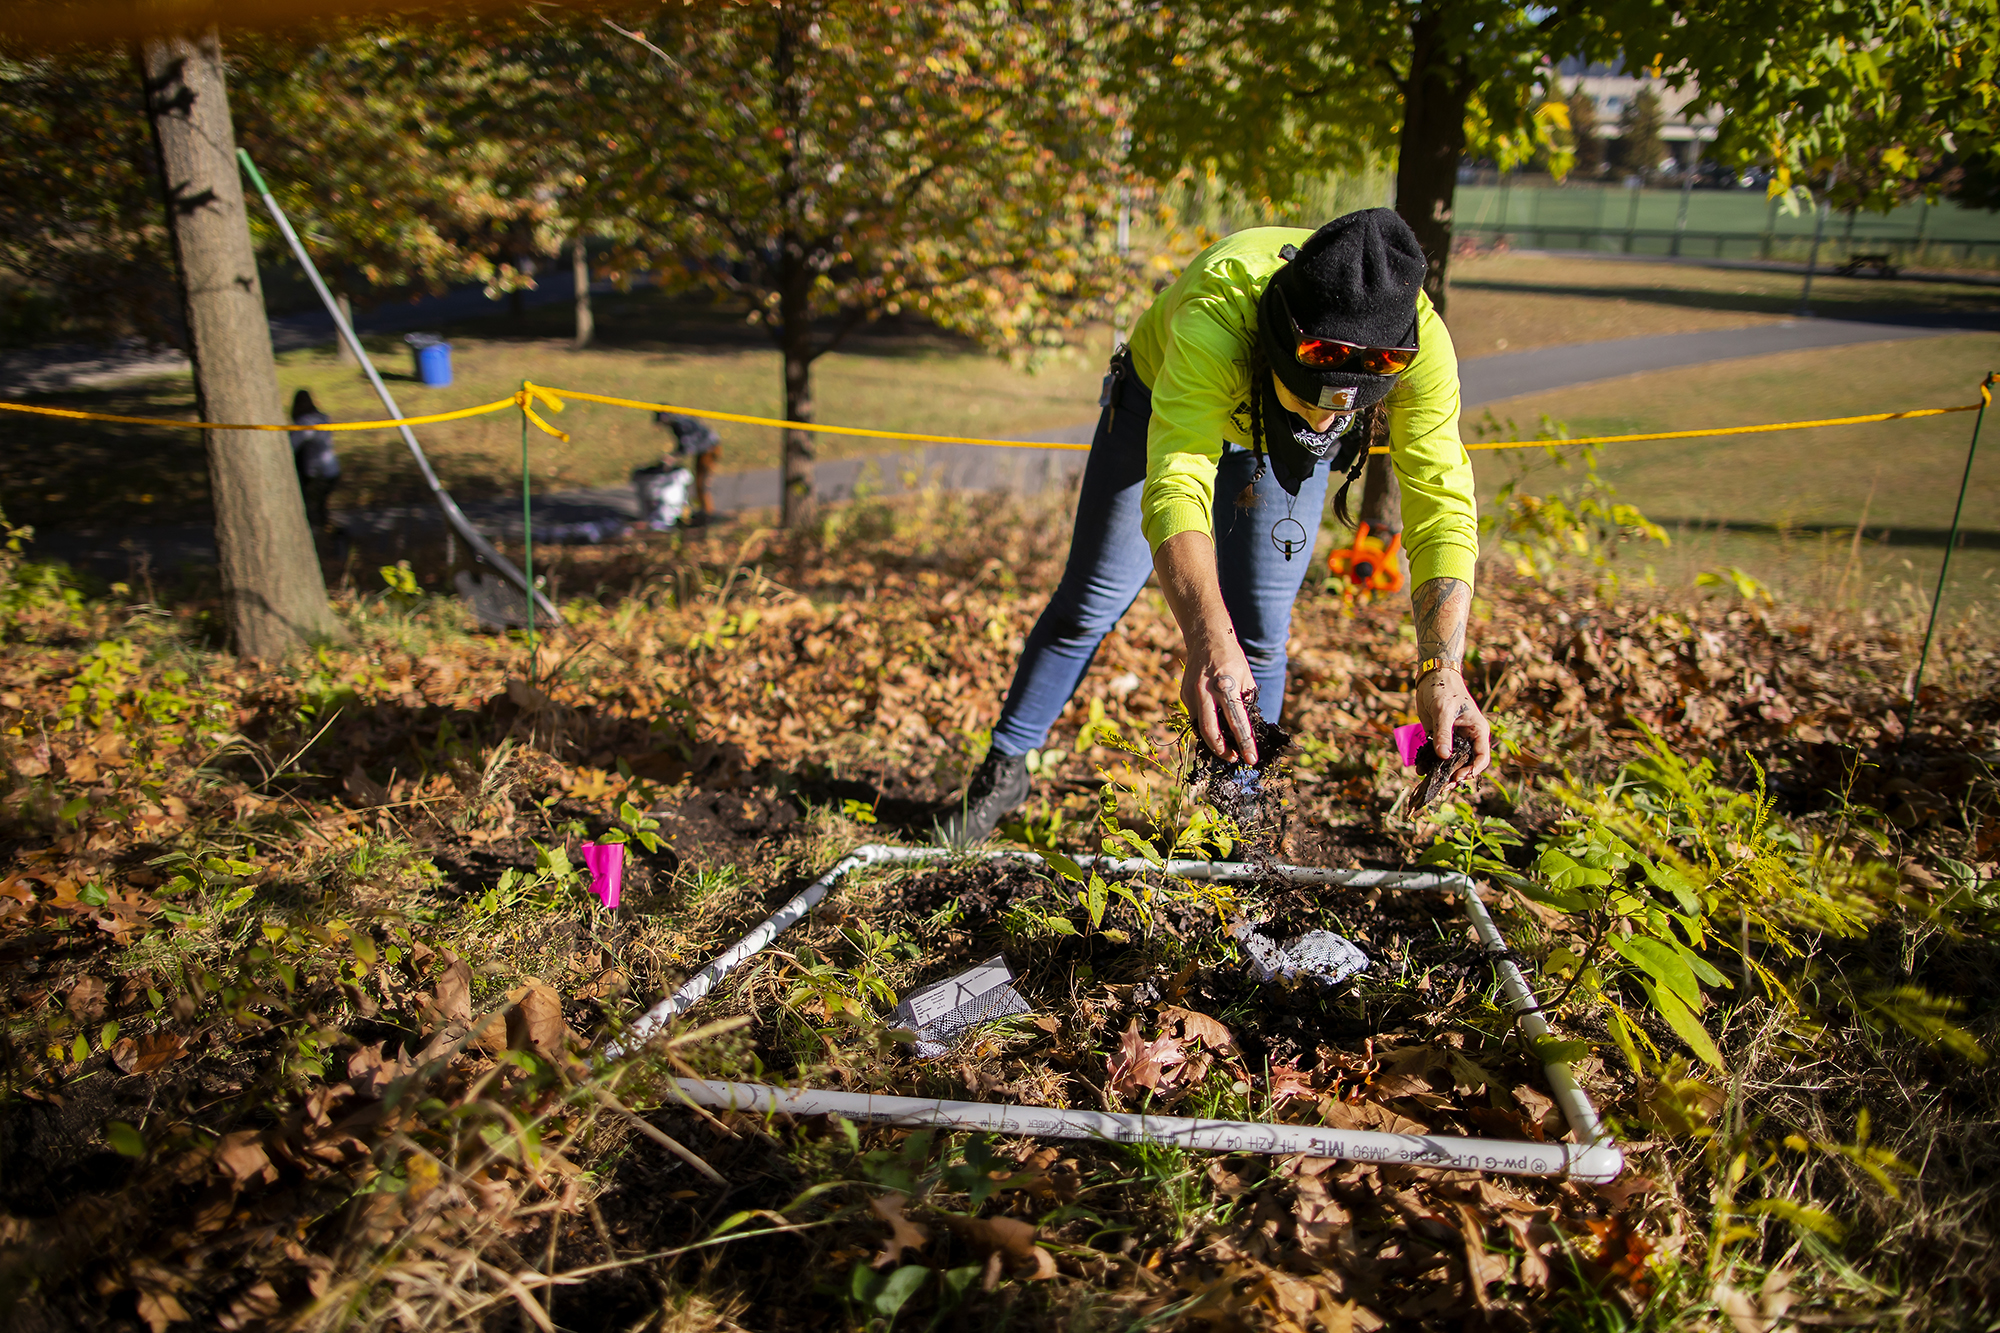 A researcher sprinkles shredded leaves over a plot of land as part of a study